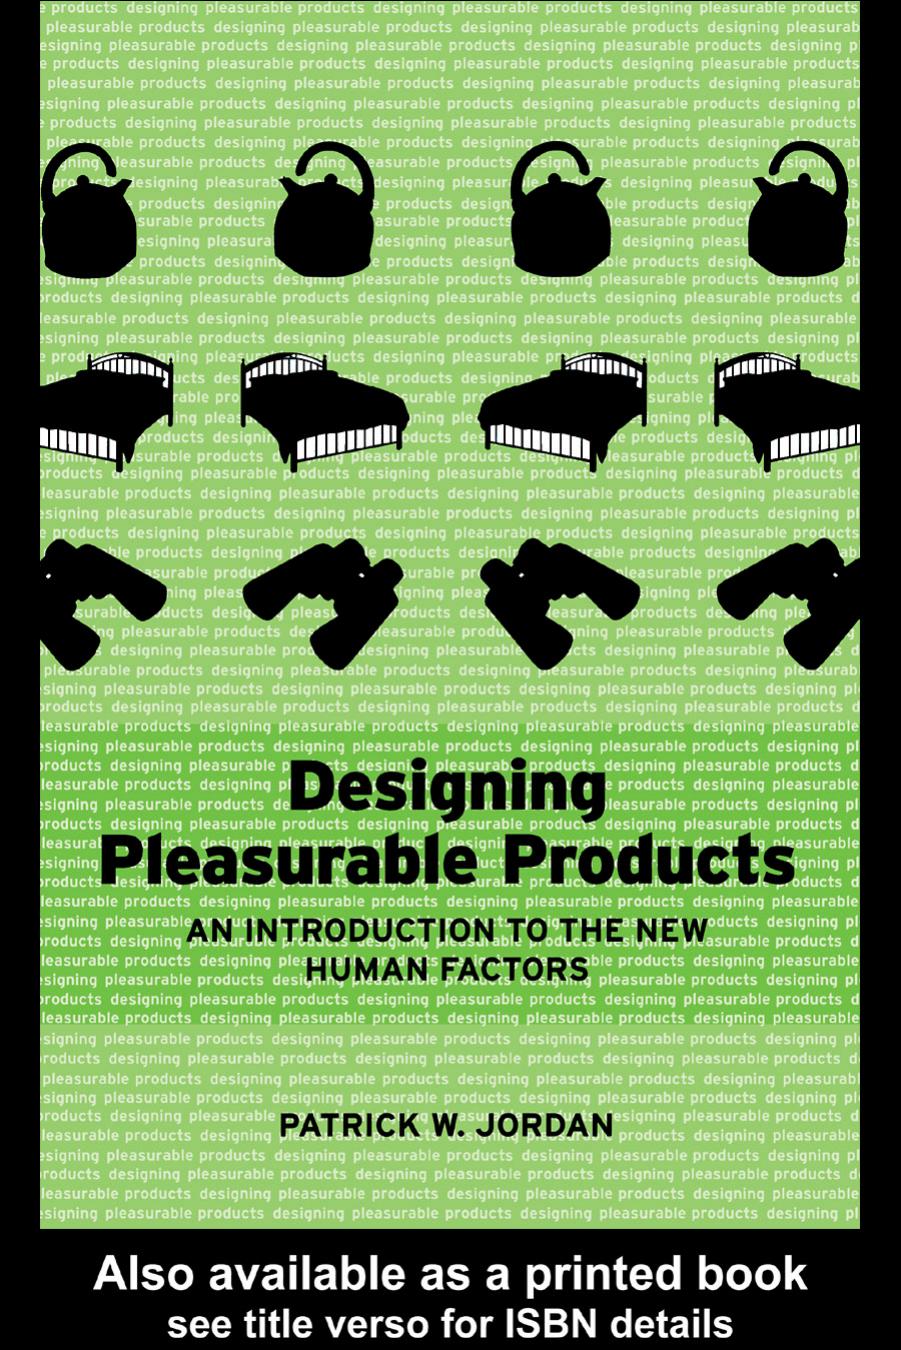 Designing Pleasurable Products: An introduction to the new human factors